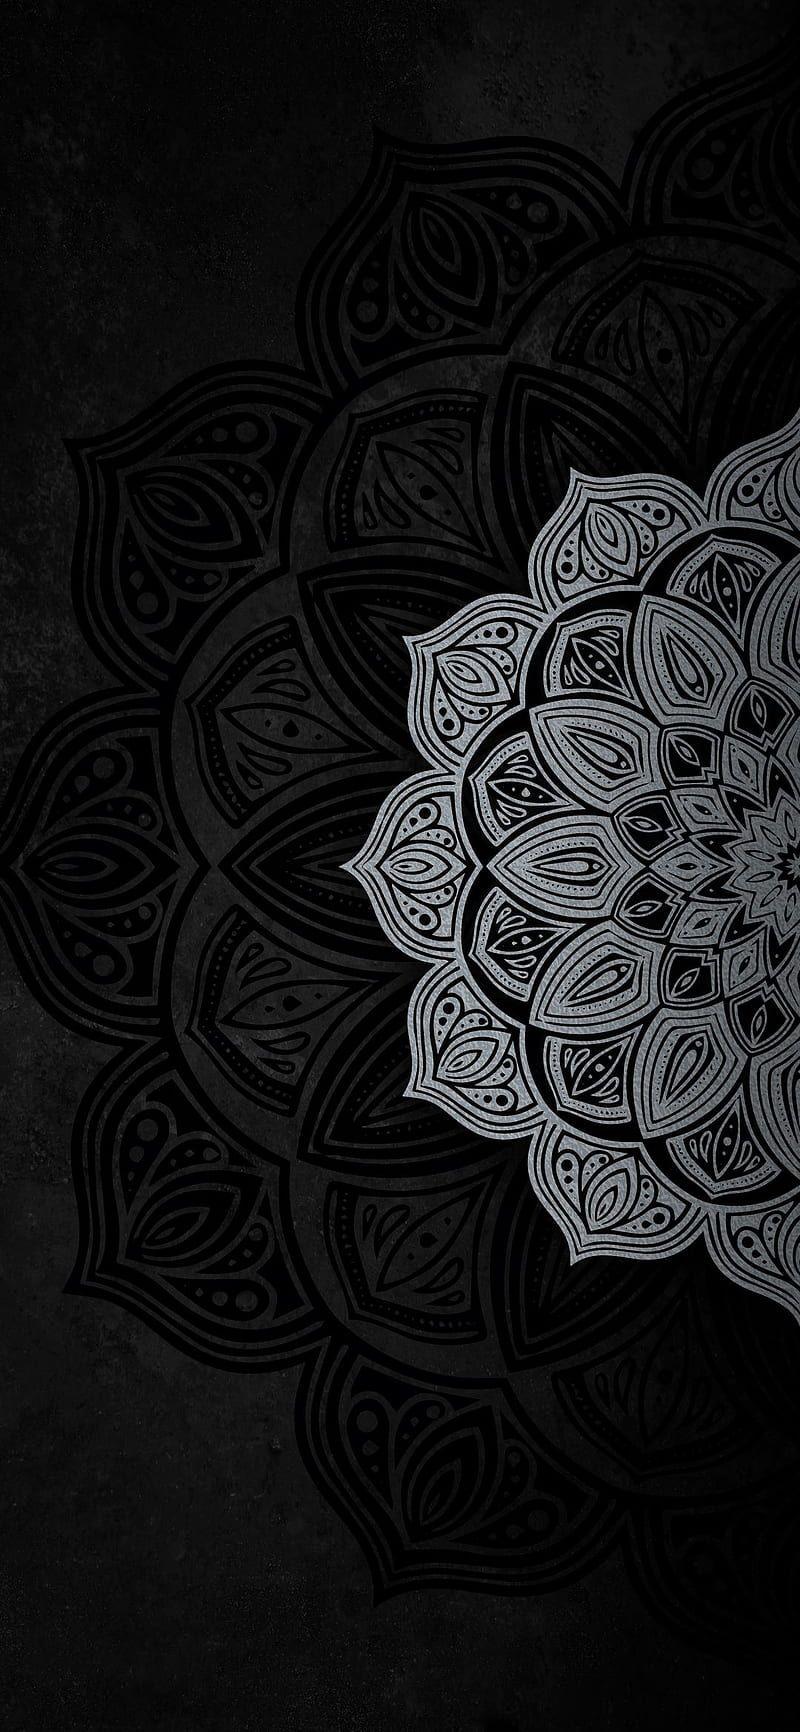 Free download 1170x2532px 1080P free download Black mandala HD mobile  [800x1733] for your Desktop, Mobile & Tablet | Explore 46+ Black and White Mobile  Wallpapers | Wallpaper Black And White, White And